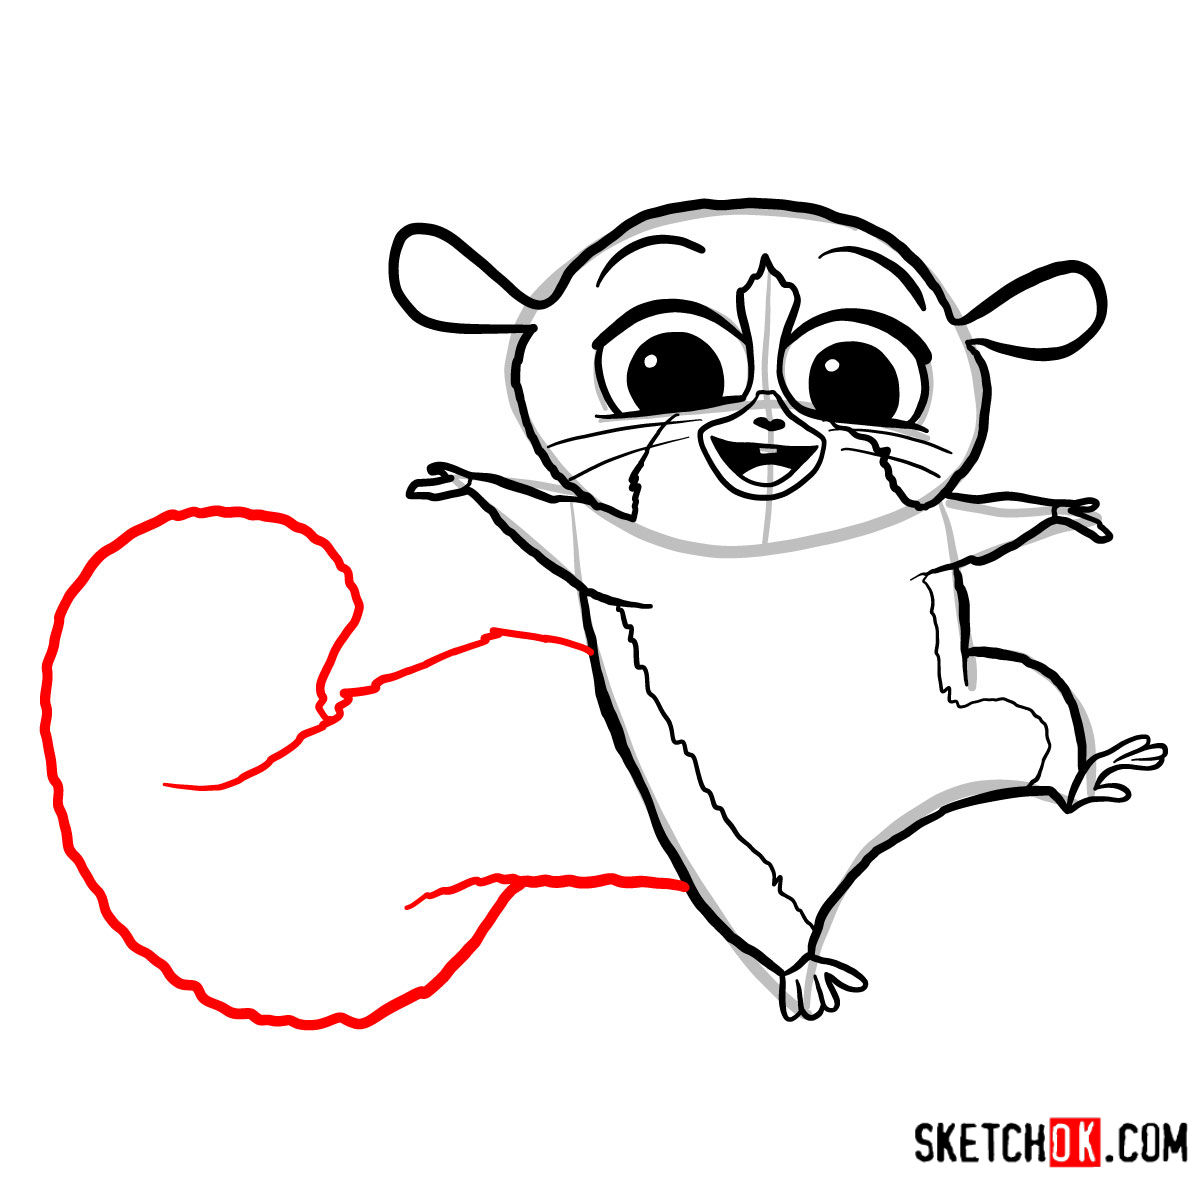 How to draw Mort | Madagascar - Sketchok easy drawing guides